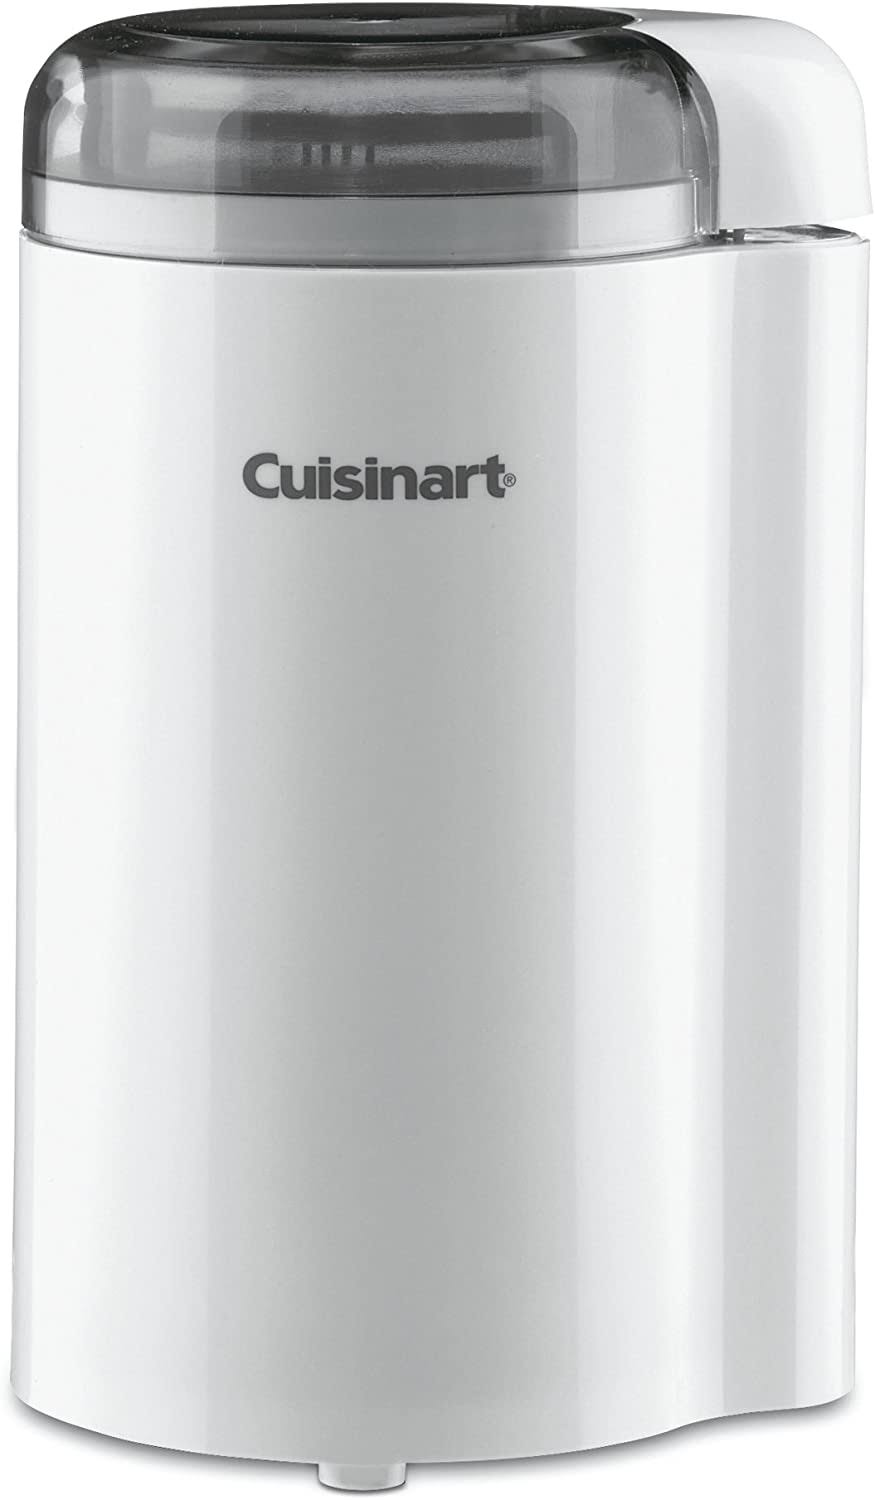 Cuisinart DCG20N Coffee Grinder - White, 12 Cup